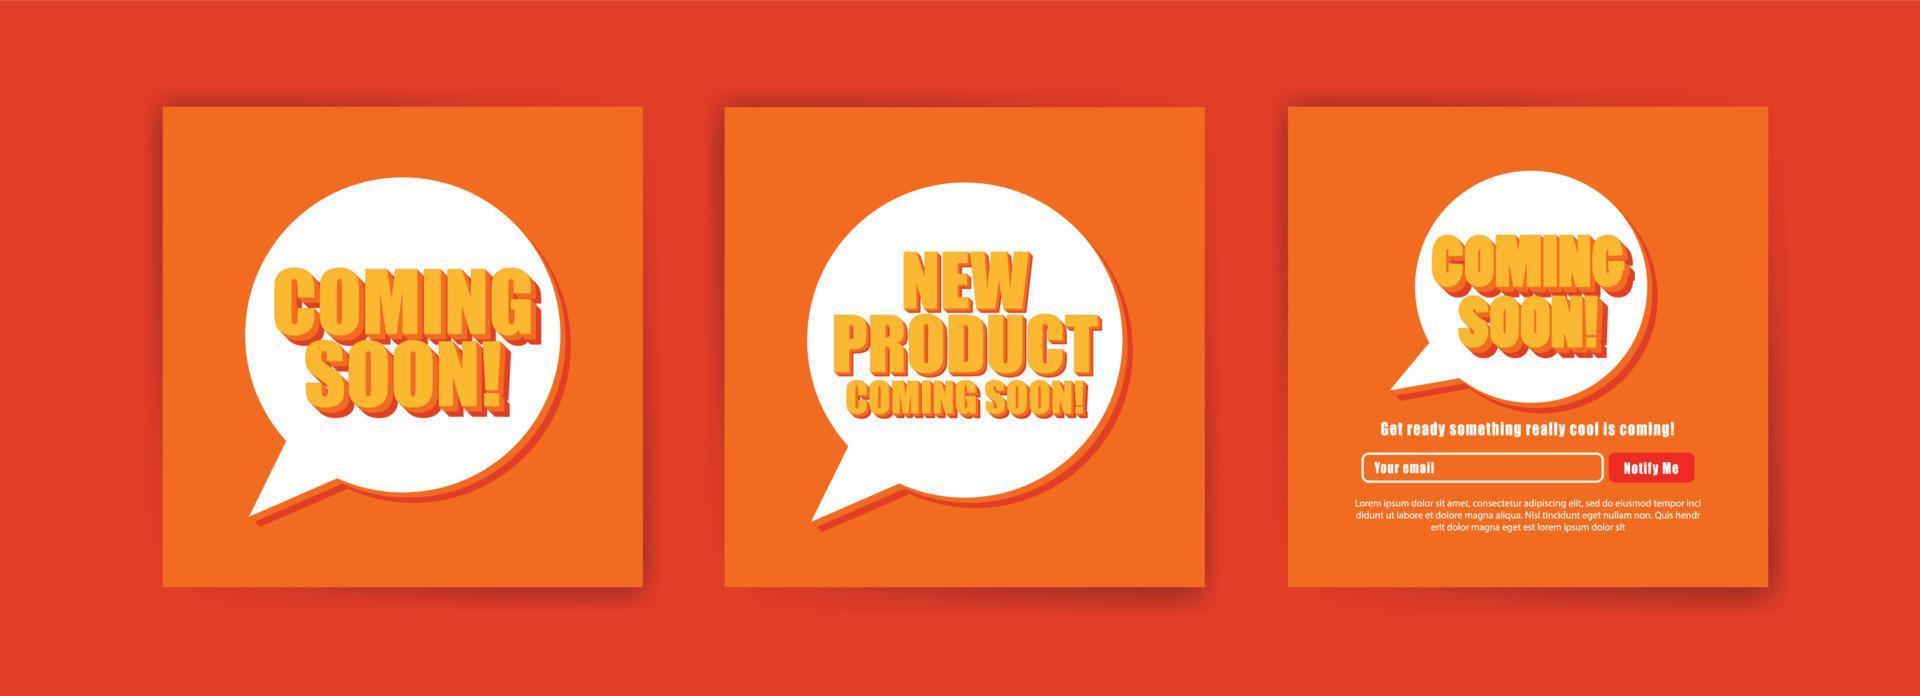 Coming soon banners. Vector template for banners, posters, cards and social media posts.